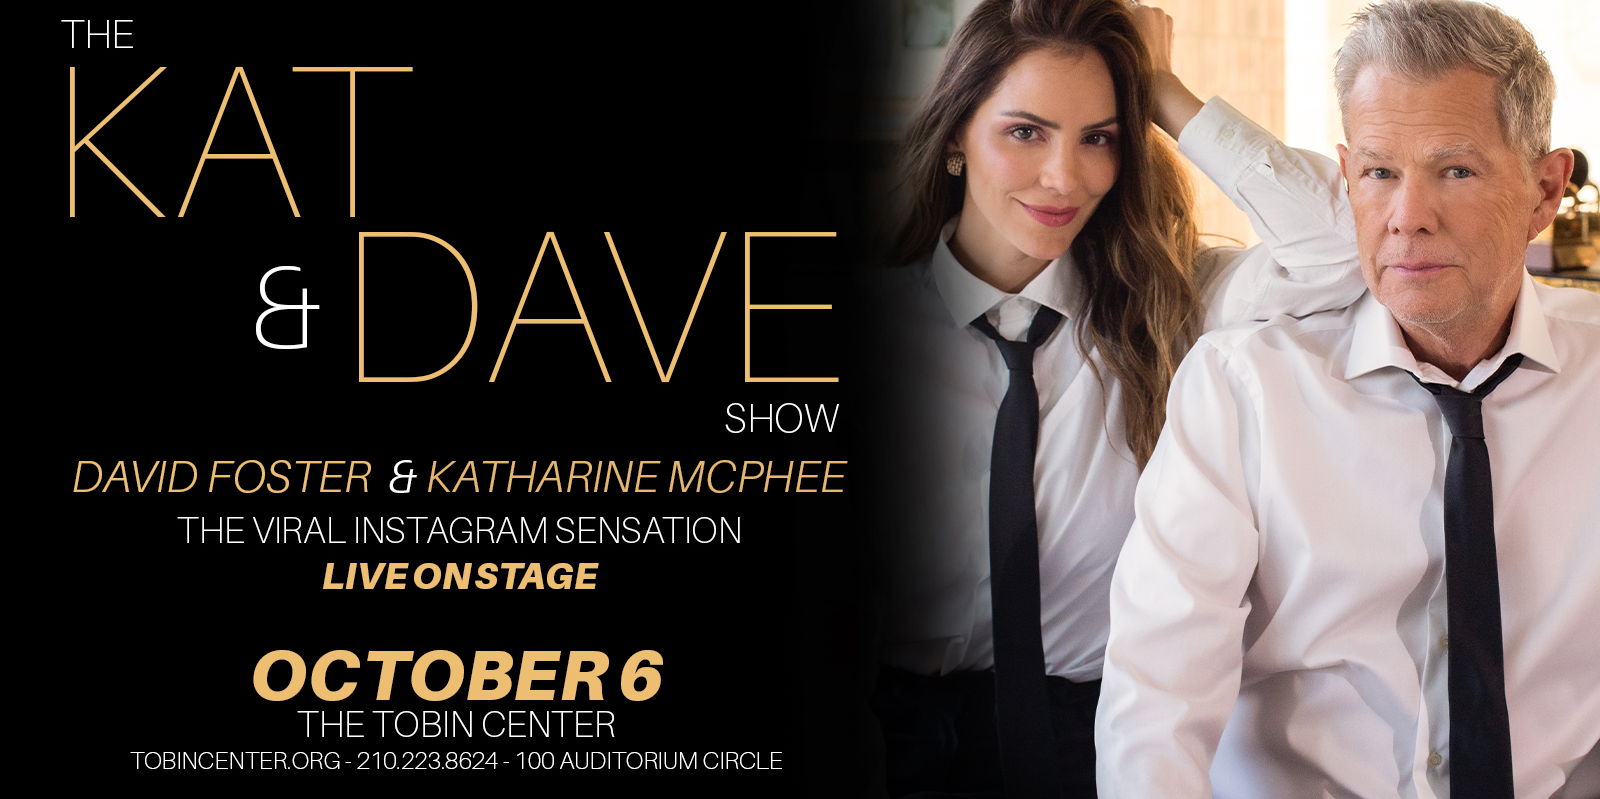 The Kat & Dave Show promotional image